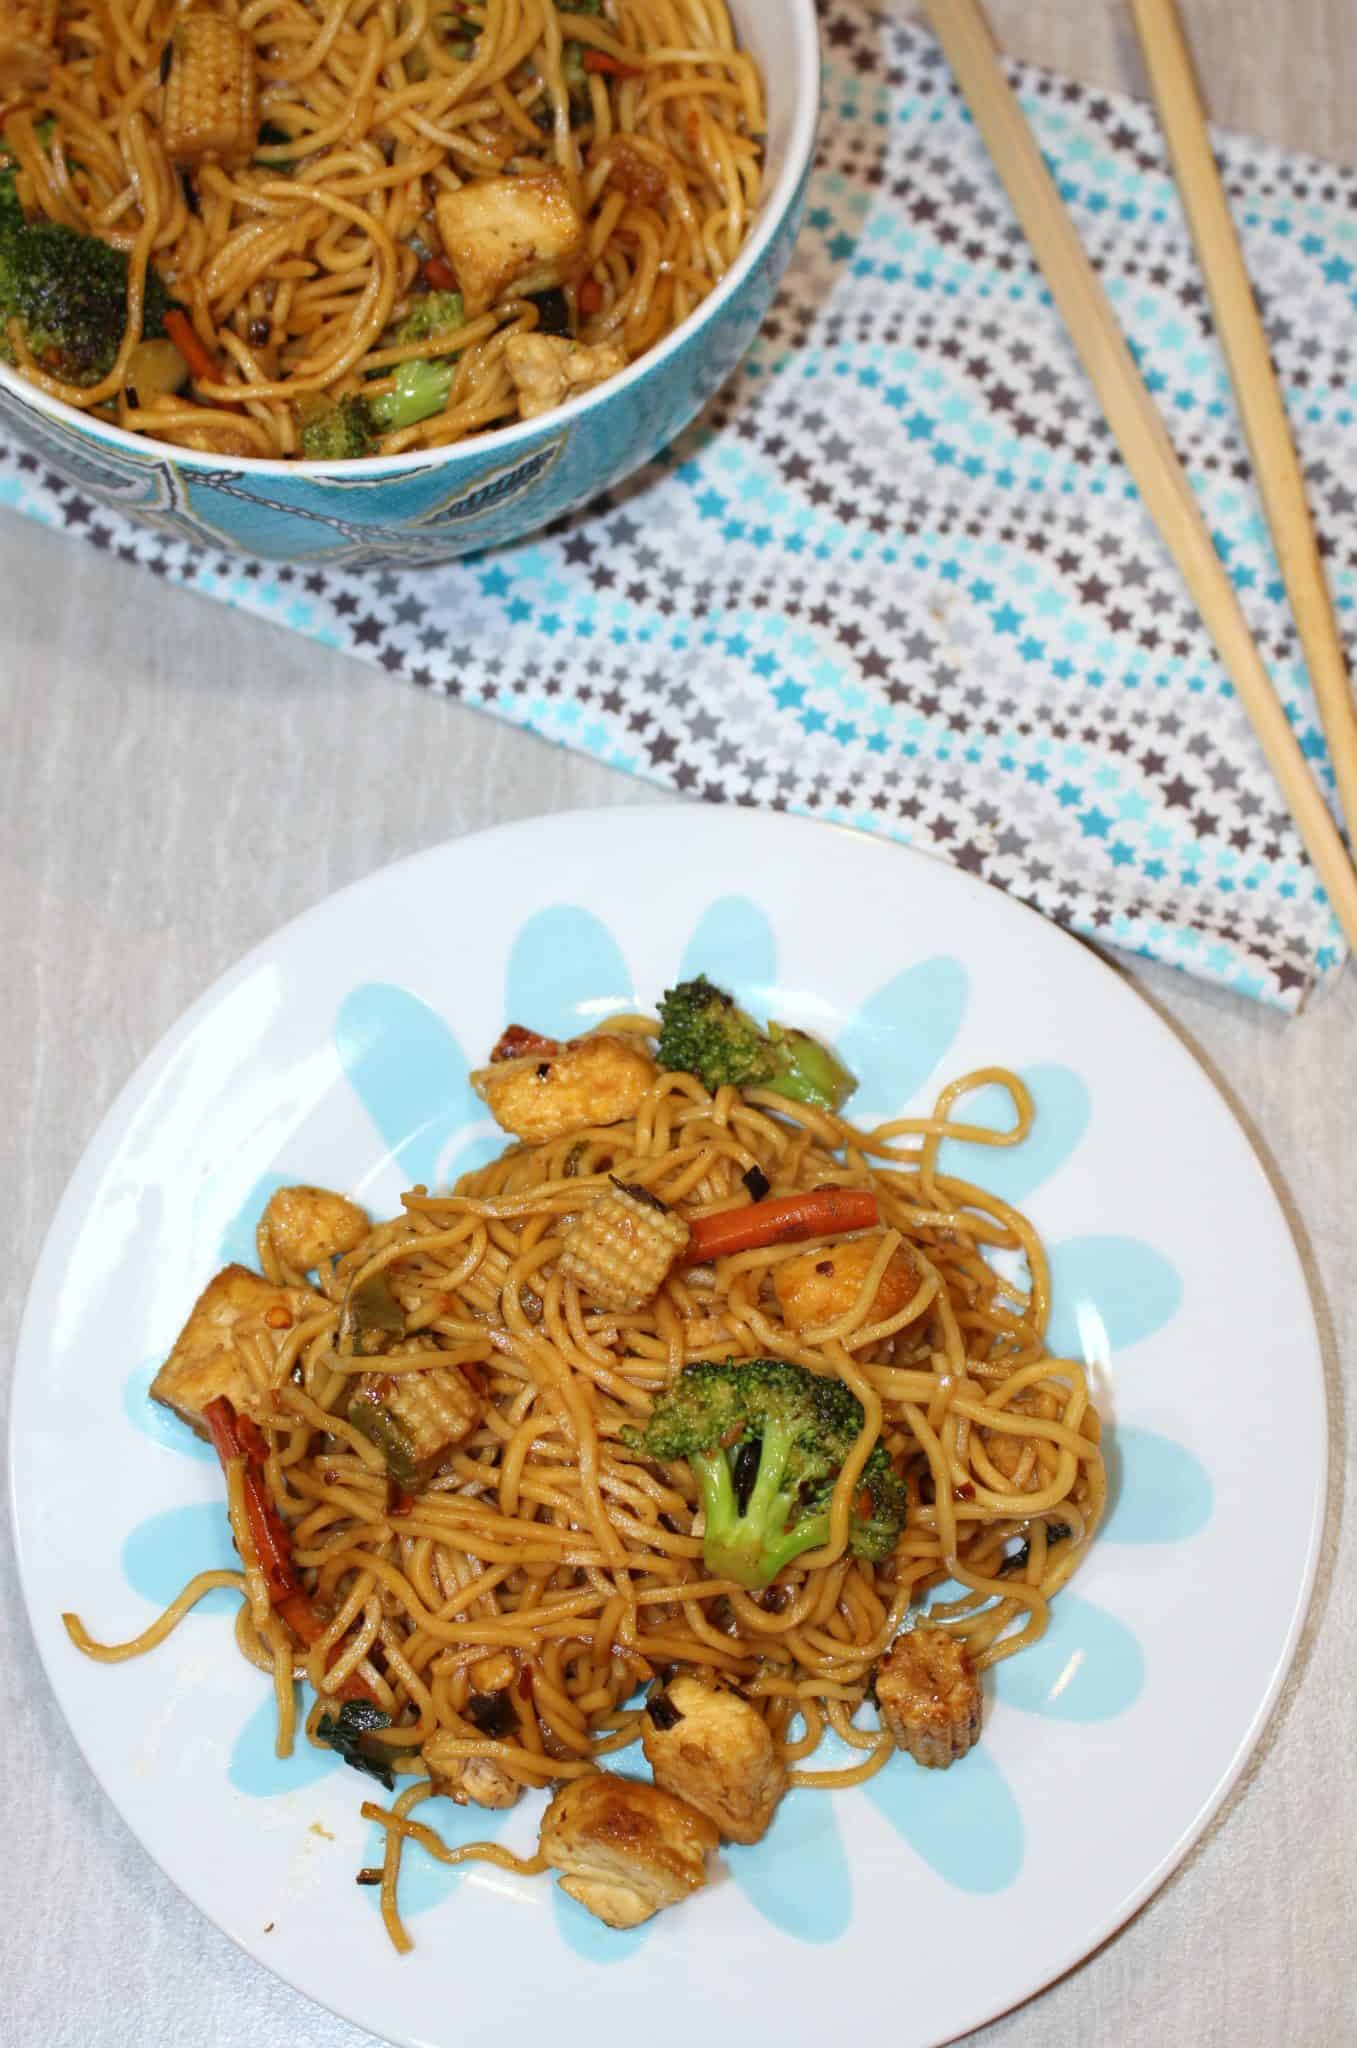 Vegetable Lo Mein - Chinese Vegetable and Tofu Lo Mein is ready to serve